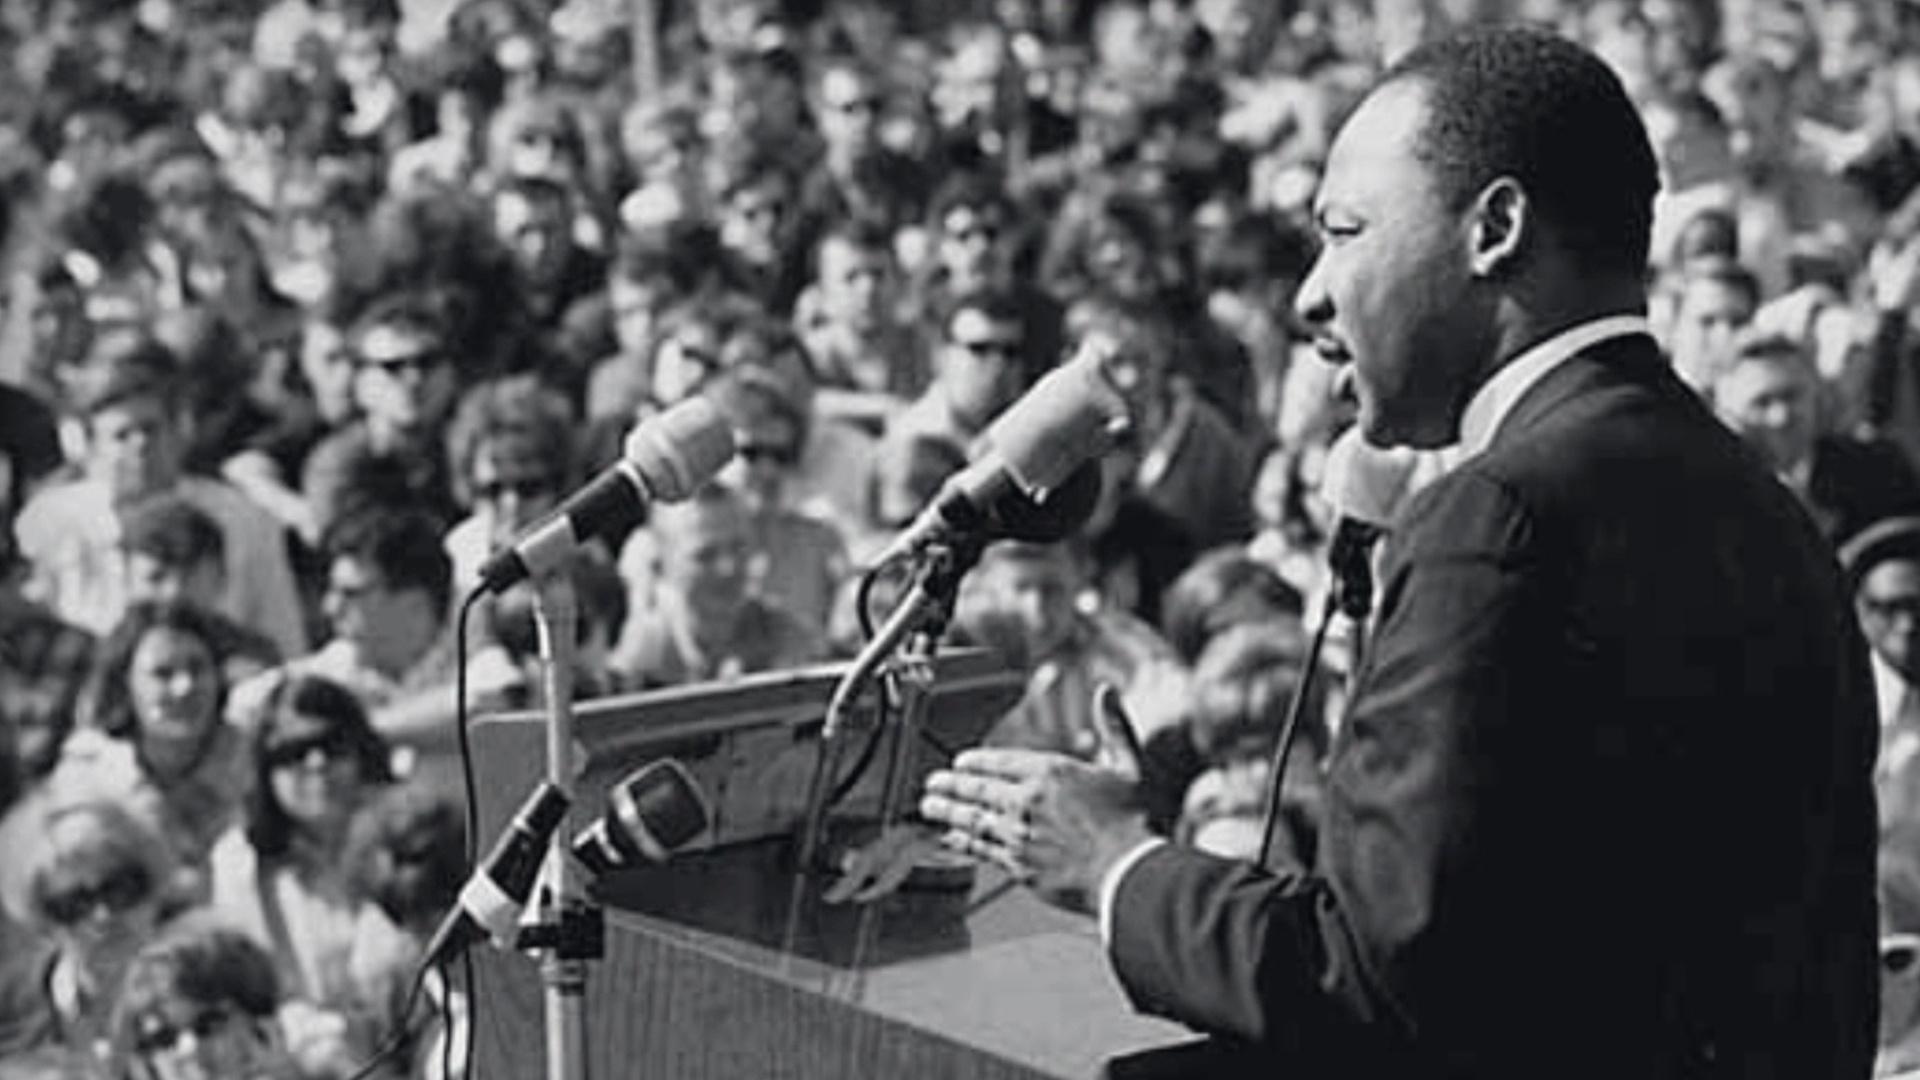 Martin Luther King Jr. | Civil Rights Leader Video | PBS LearningMedia